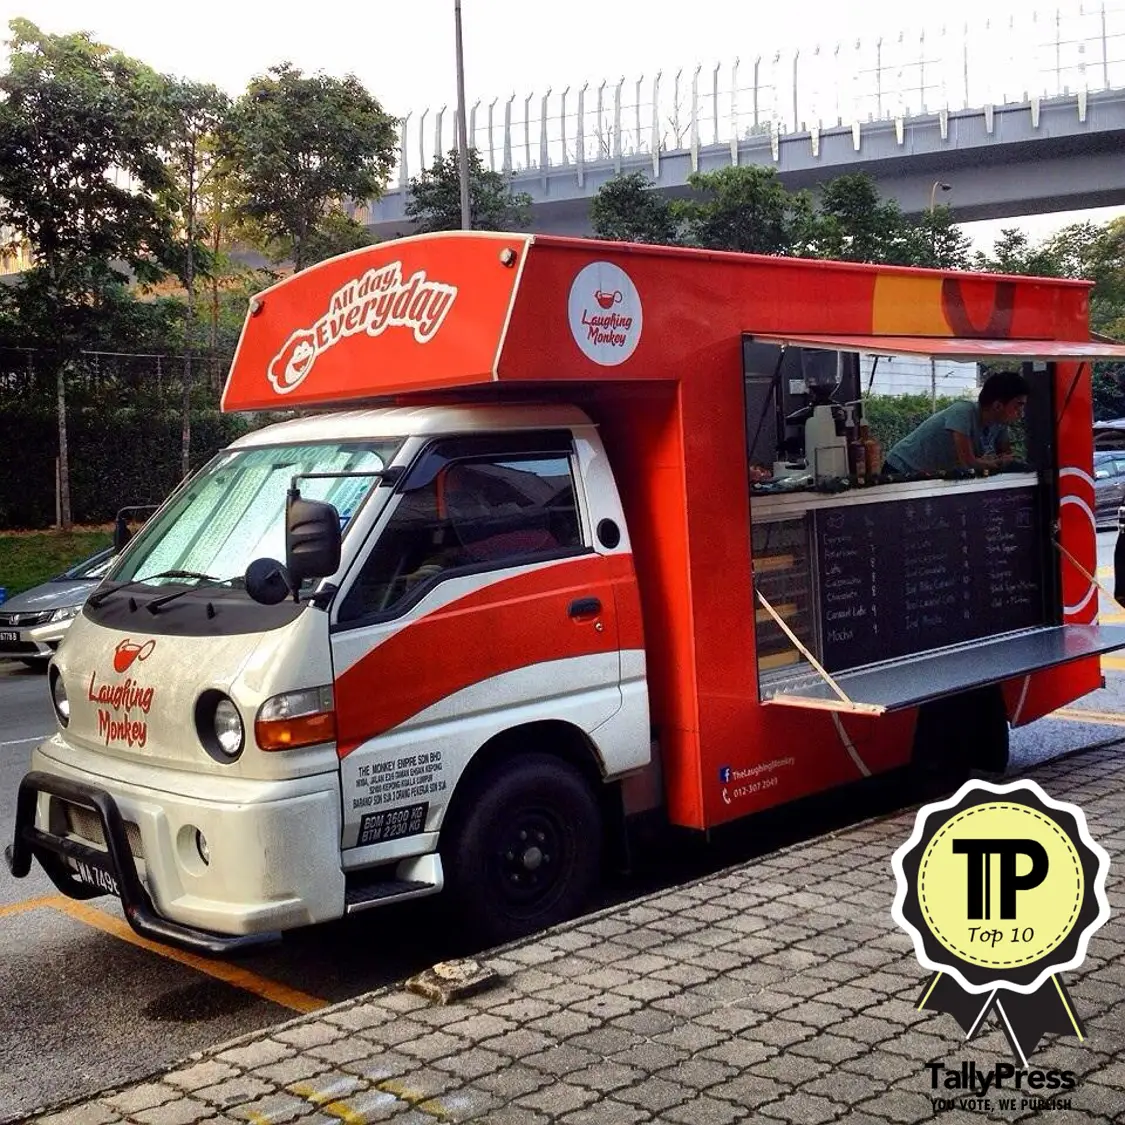 4-the-lauging-monkey-cafe-top-10-trending-food-trucks-in-malaysia-jpg